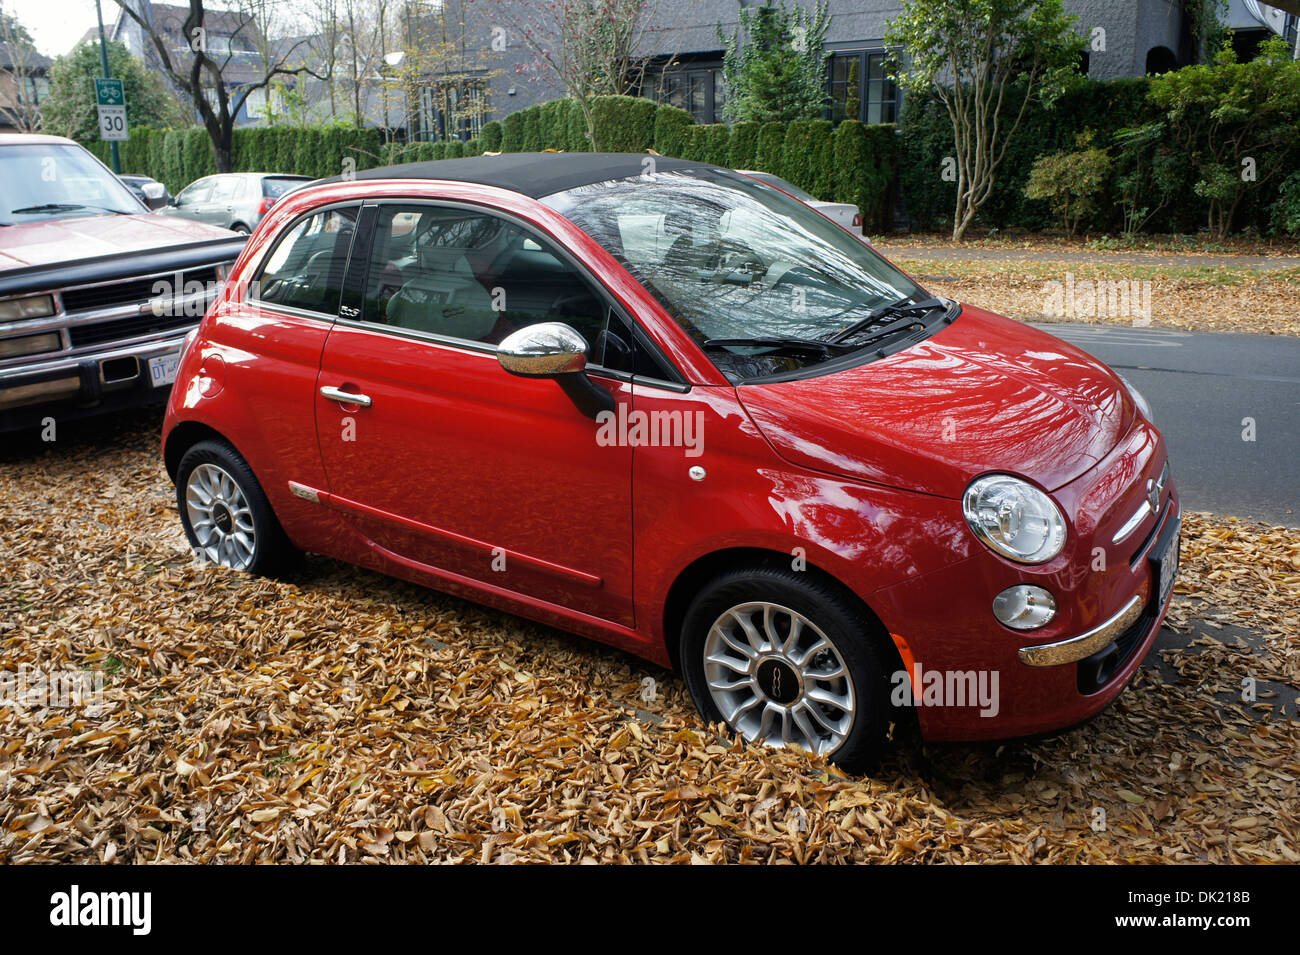 https://c8.alamy.com/comp/DK218B/red-fiat-500-convertible-parked-on-a-street-in-vancouver-british-columbia-DK218B.jpg